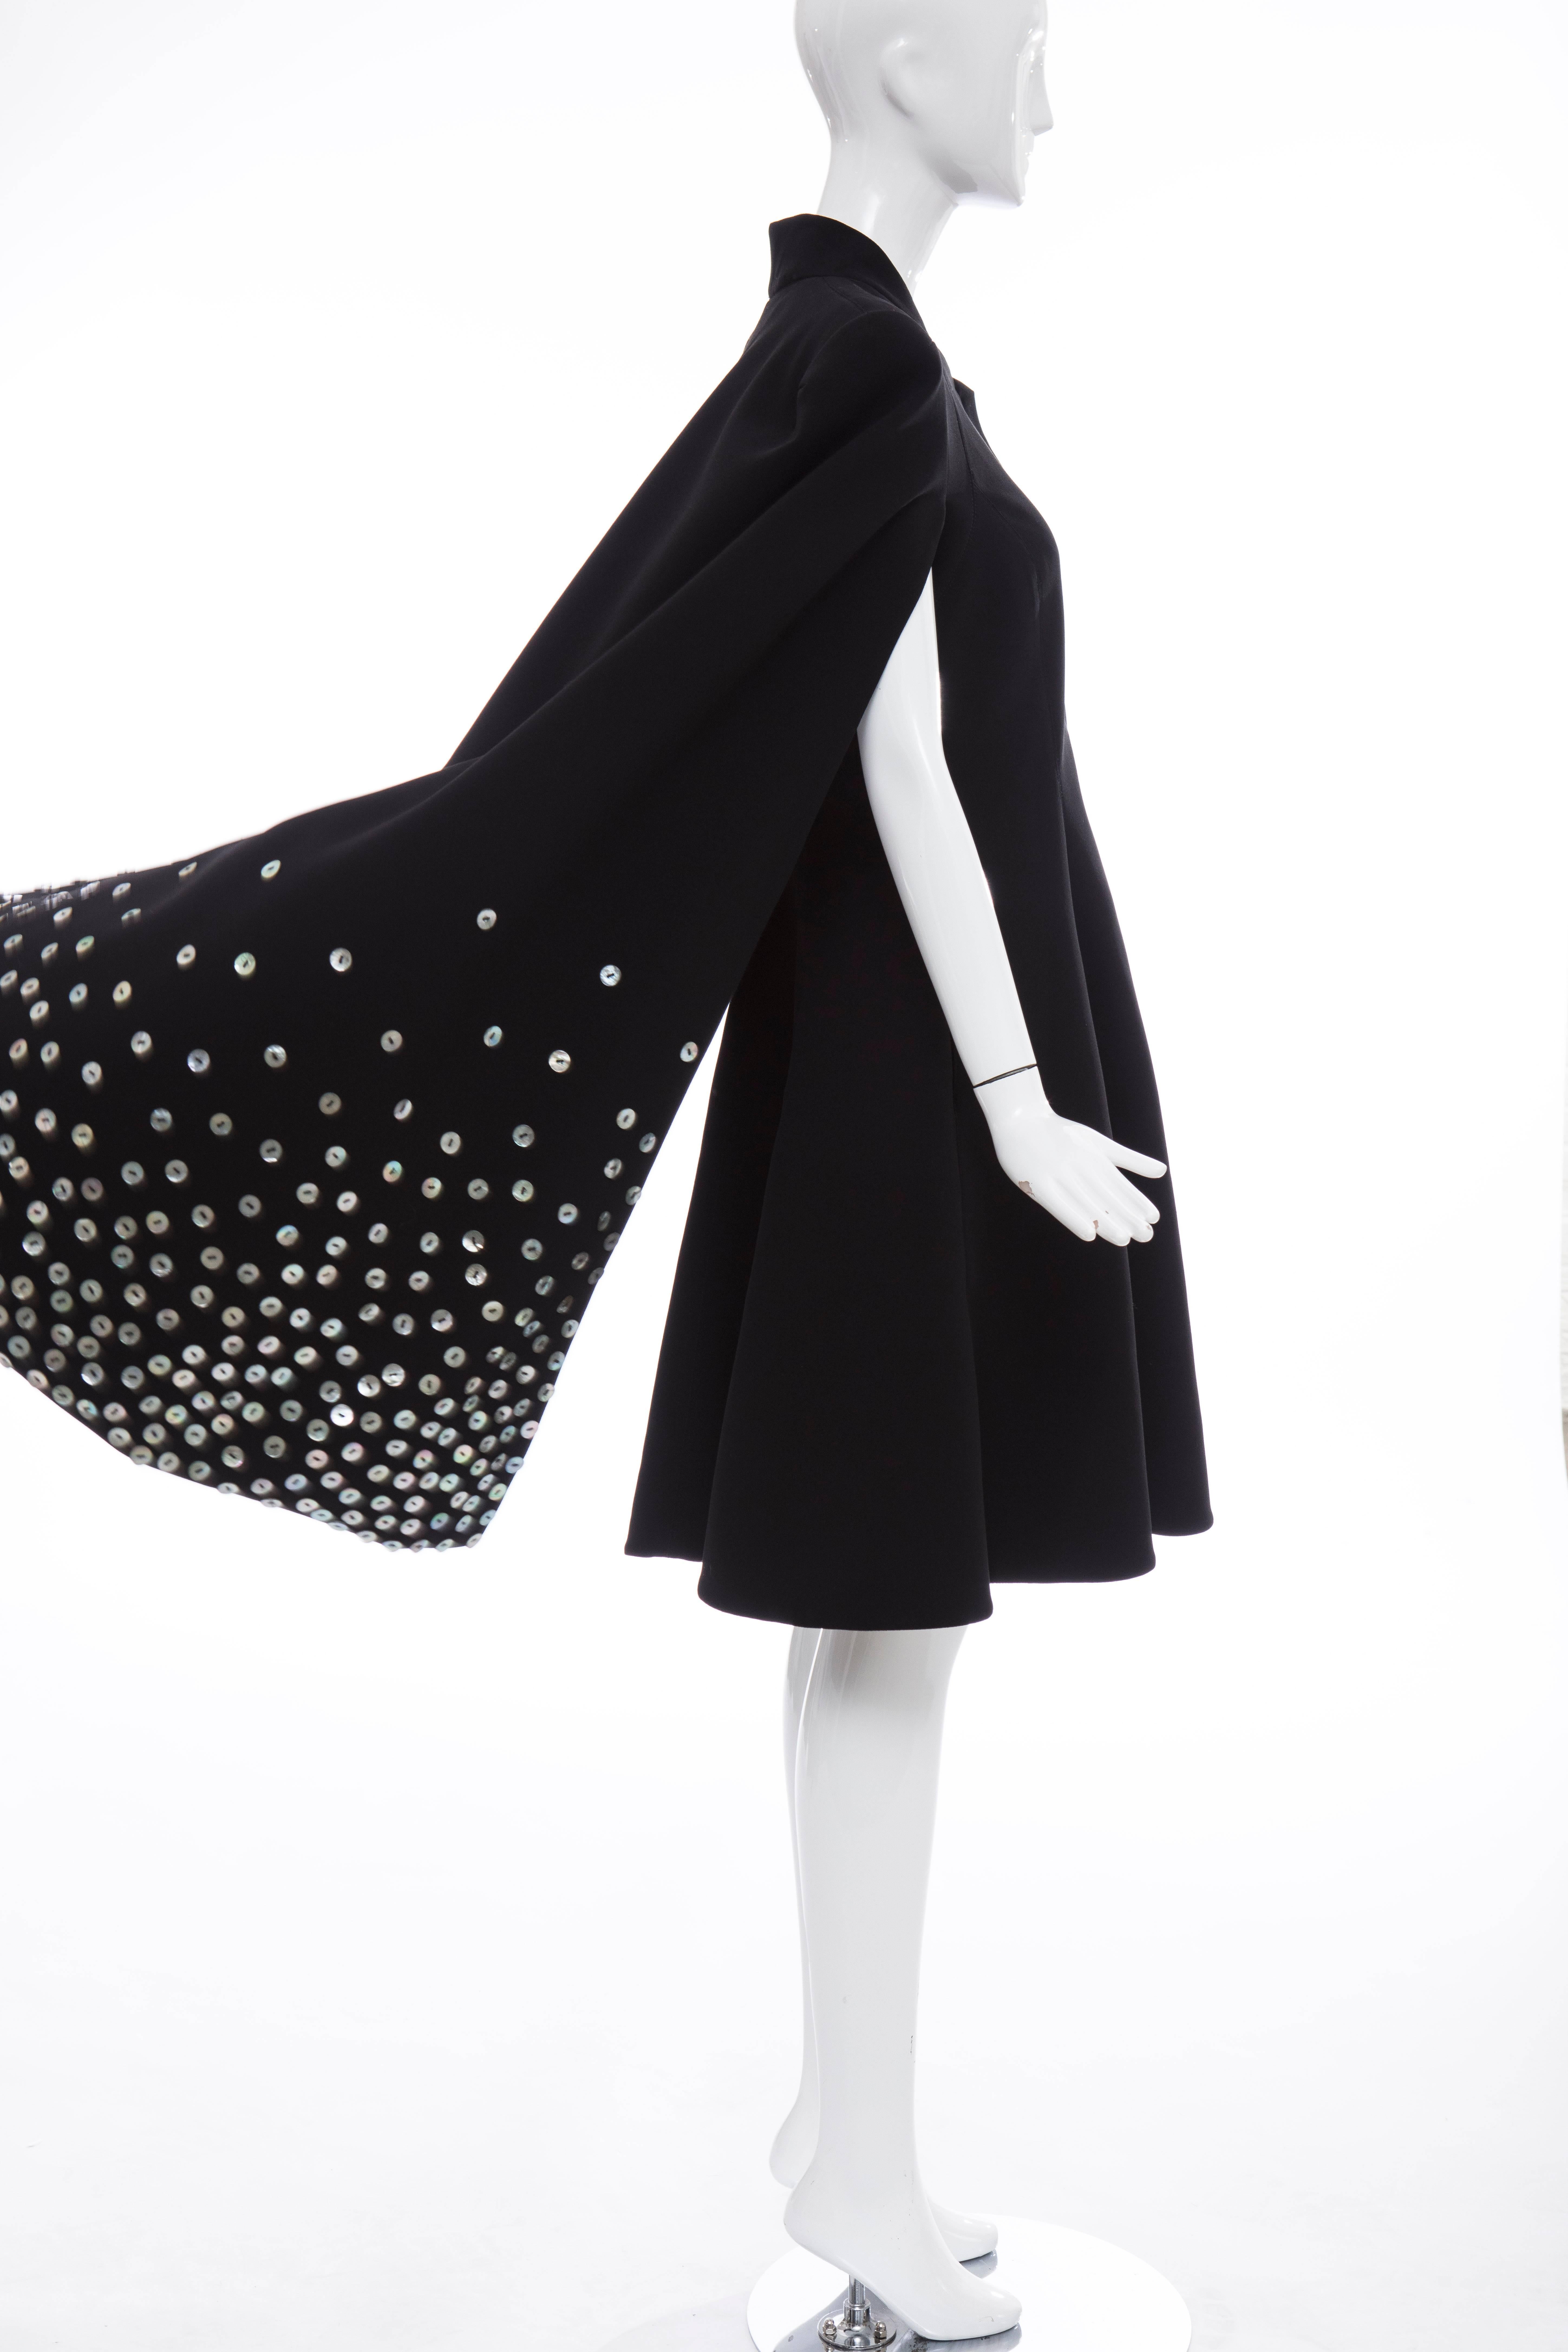 Gareth Pugh Zip Front Black Dress With Mother of Pearl Cape, Spring 2015 For Sale 3